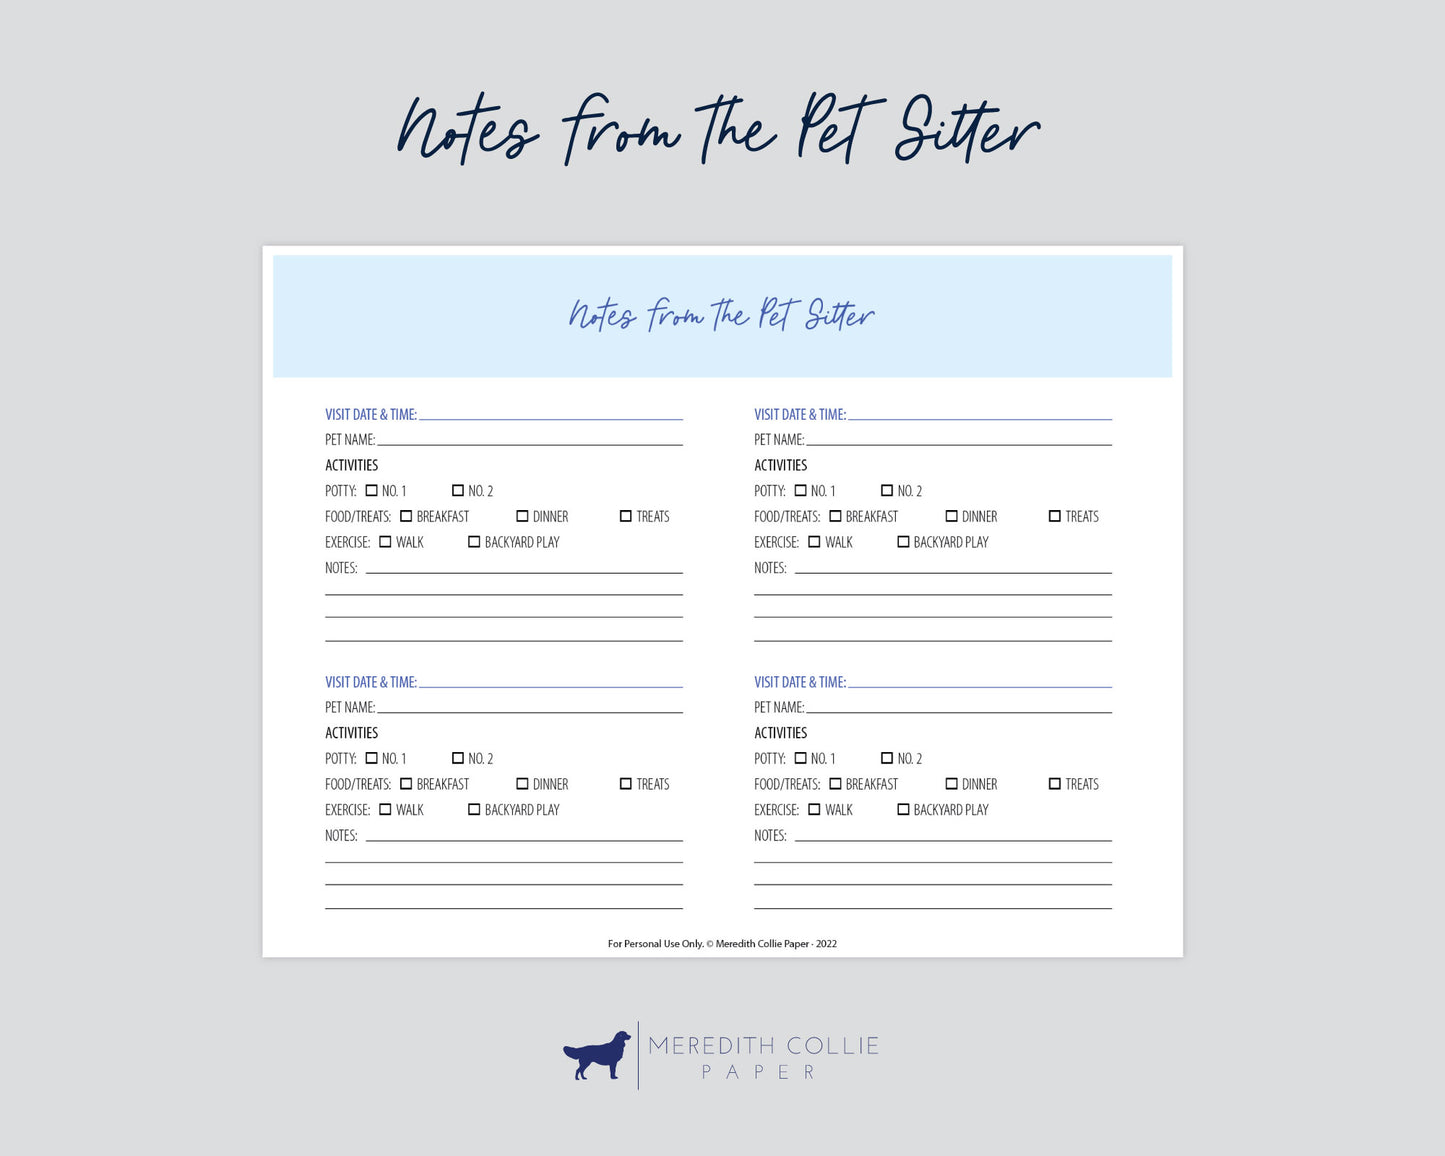 notes from the pet sitter, digital download, Meredith Collie paper